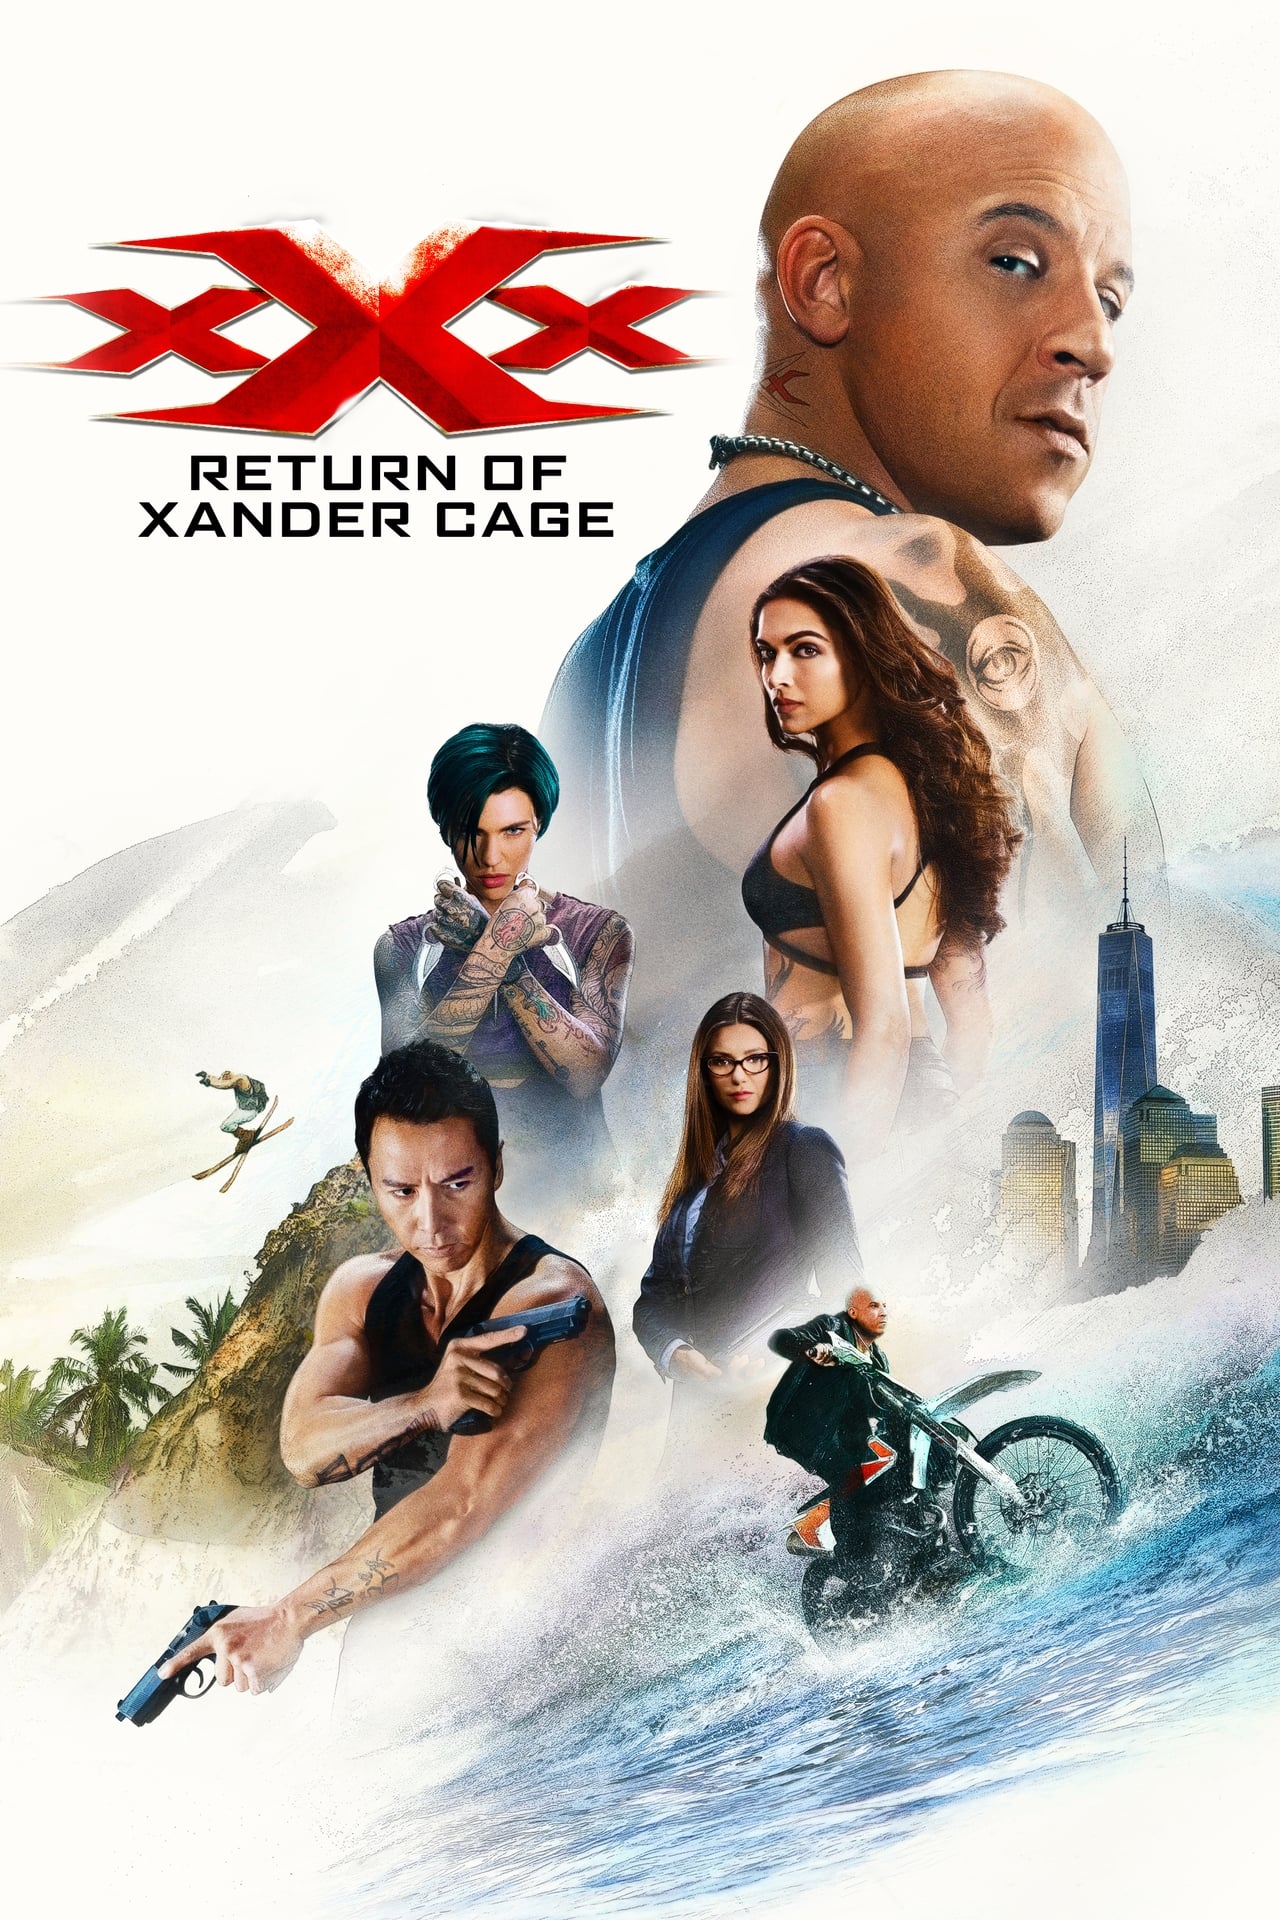 Xxx Return Of Xander Cage Wiki Synopsis Reviews Watch And Download